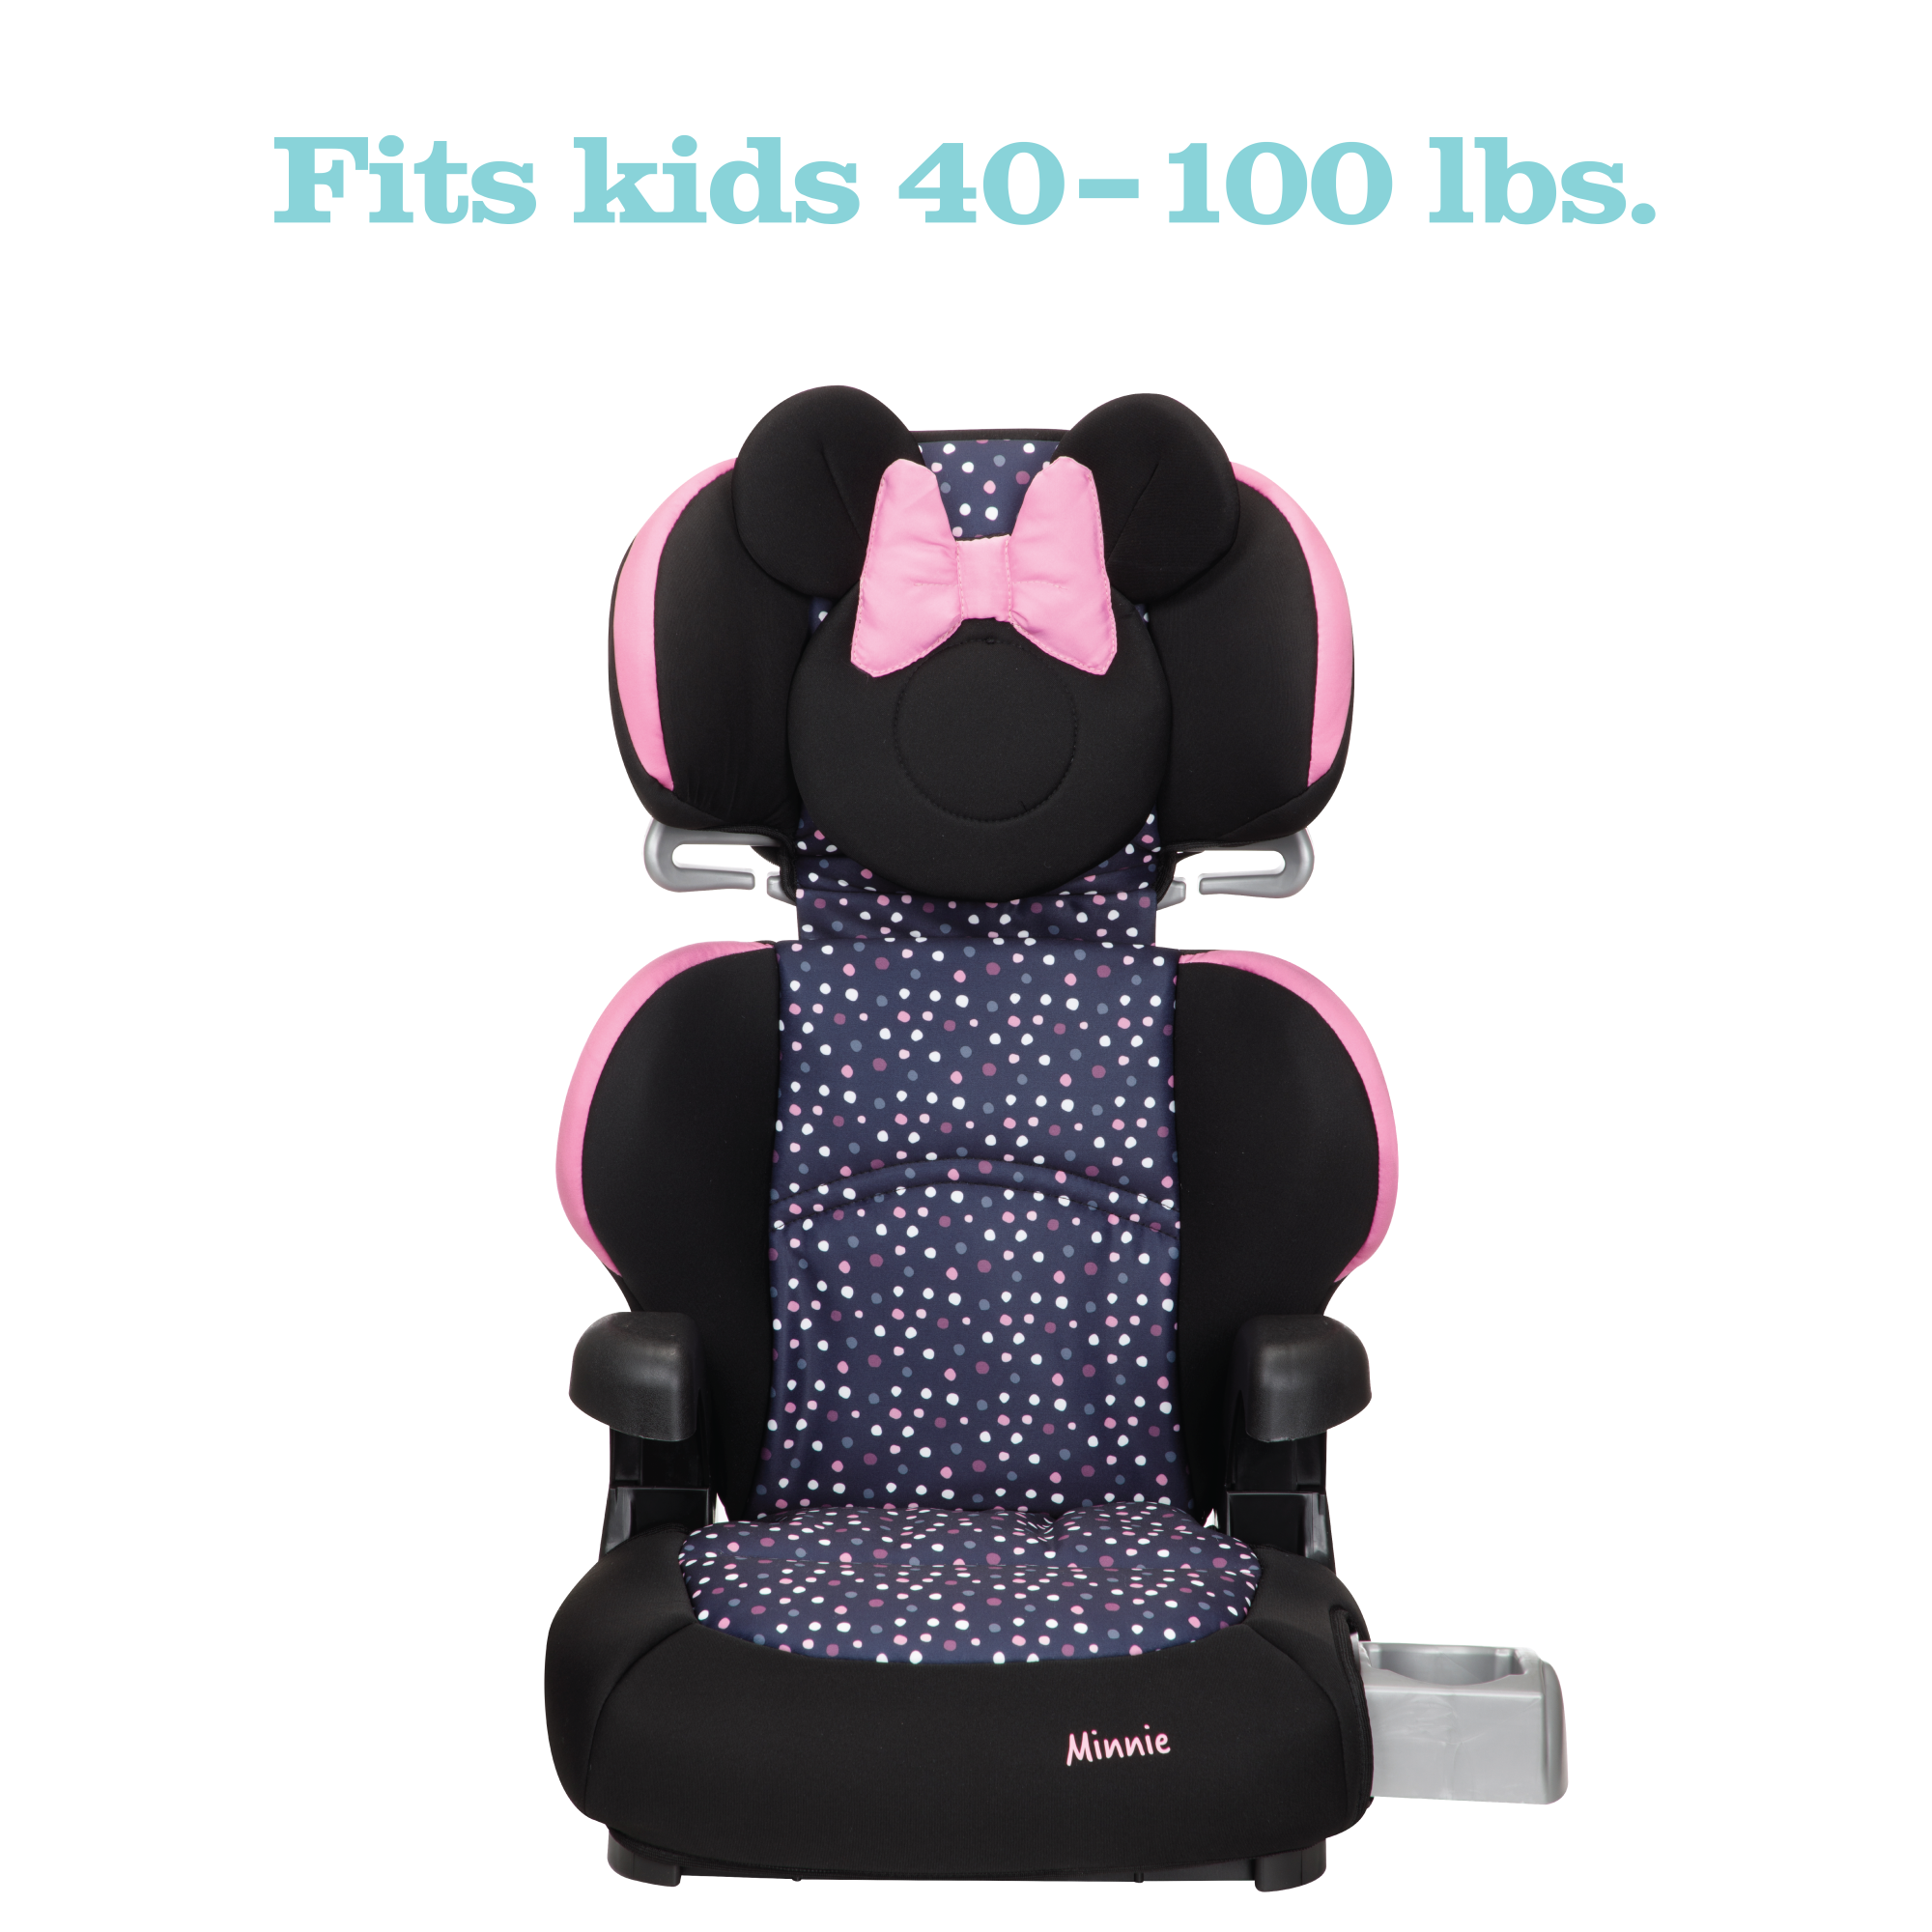 Disney Baby Pronto!™ Belt-Positioning Booster Car Seat - Minnie Dot Party - 45 degree angle view of left side